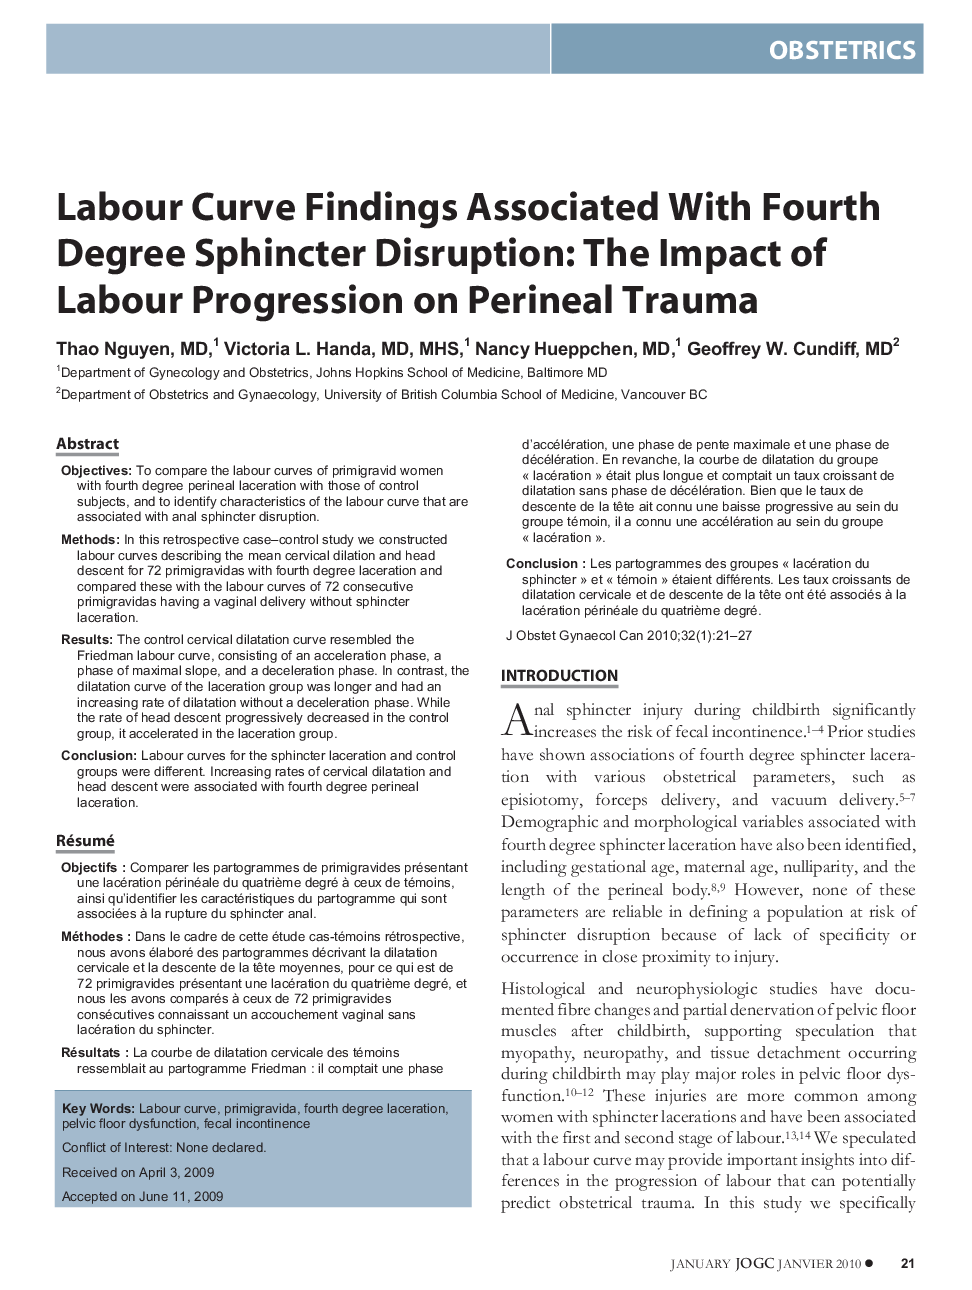 Labour Curve Findings Associated With Fourth Degree Sphincter Disruption: The Impact of Labour Progression on Perineal Trauma